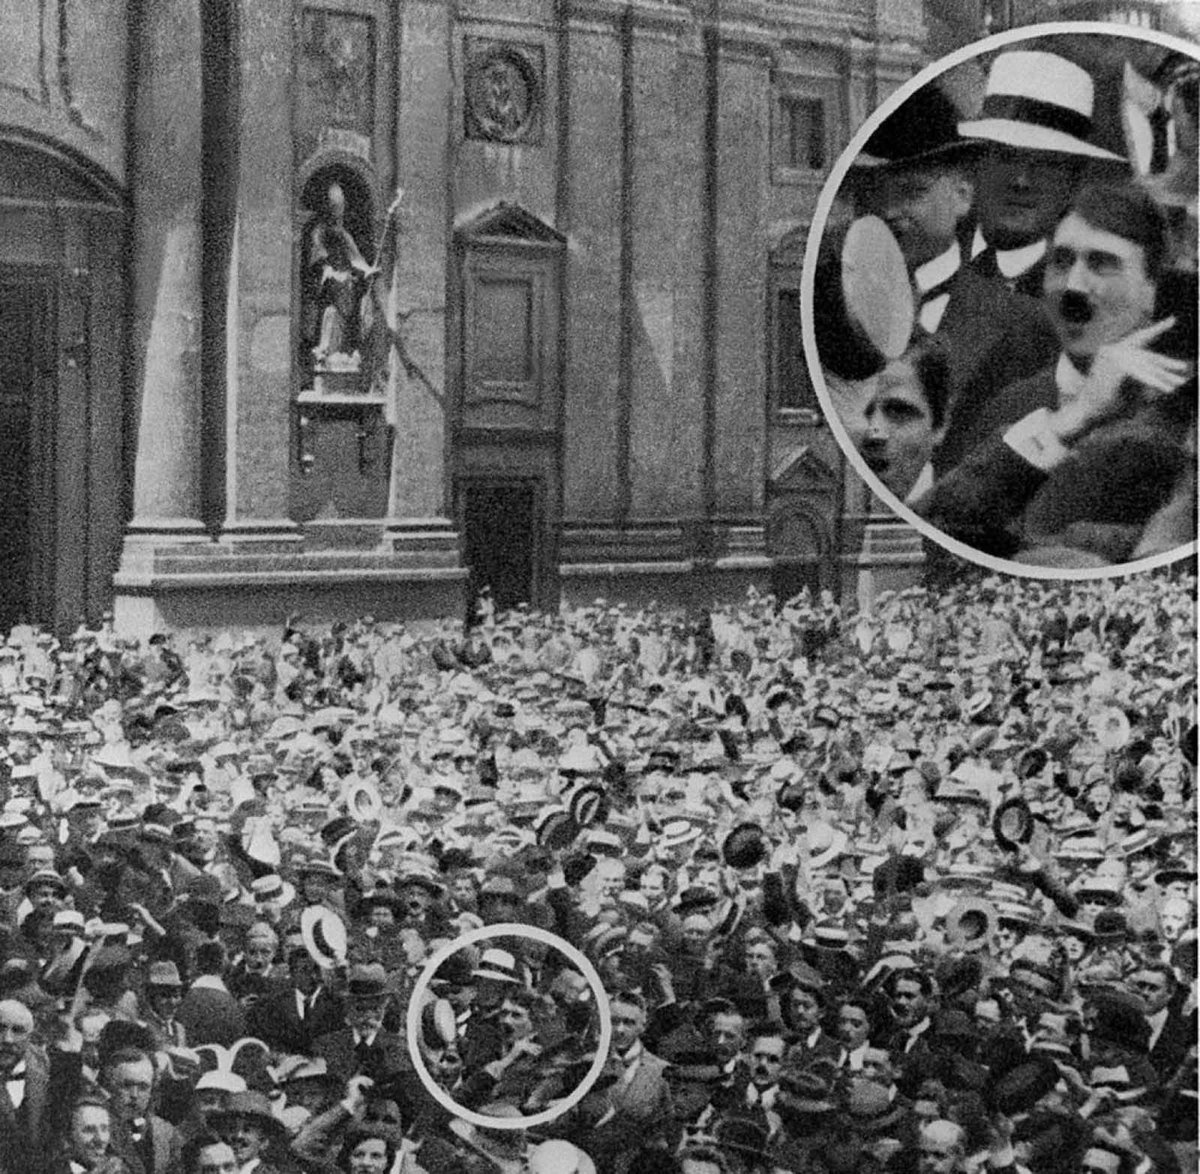 Photograph shows a young Adolf Hitler cheering the start of World War One in 1914. The photograph was captured by photographer Heinrich Hoffmann during a rally backing the war against Russia at Munich’s Odeonsplatz on August 2, 1914. Hoffmann, a founder and primary image…